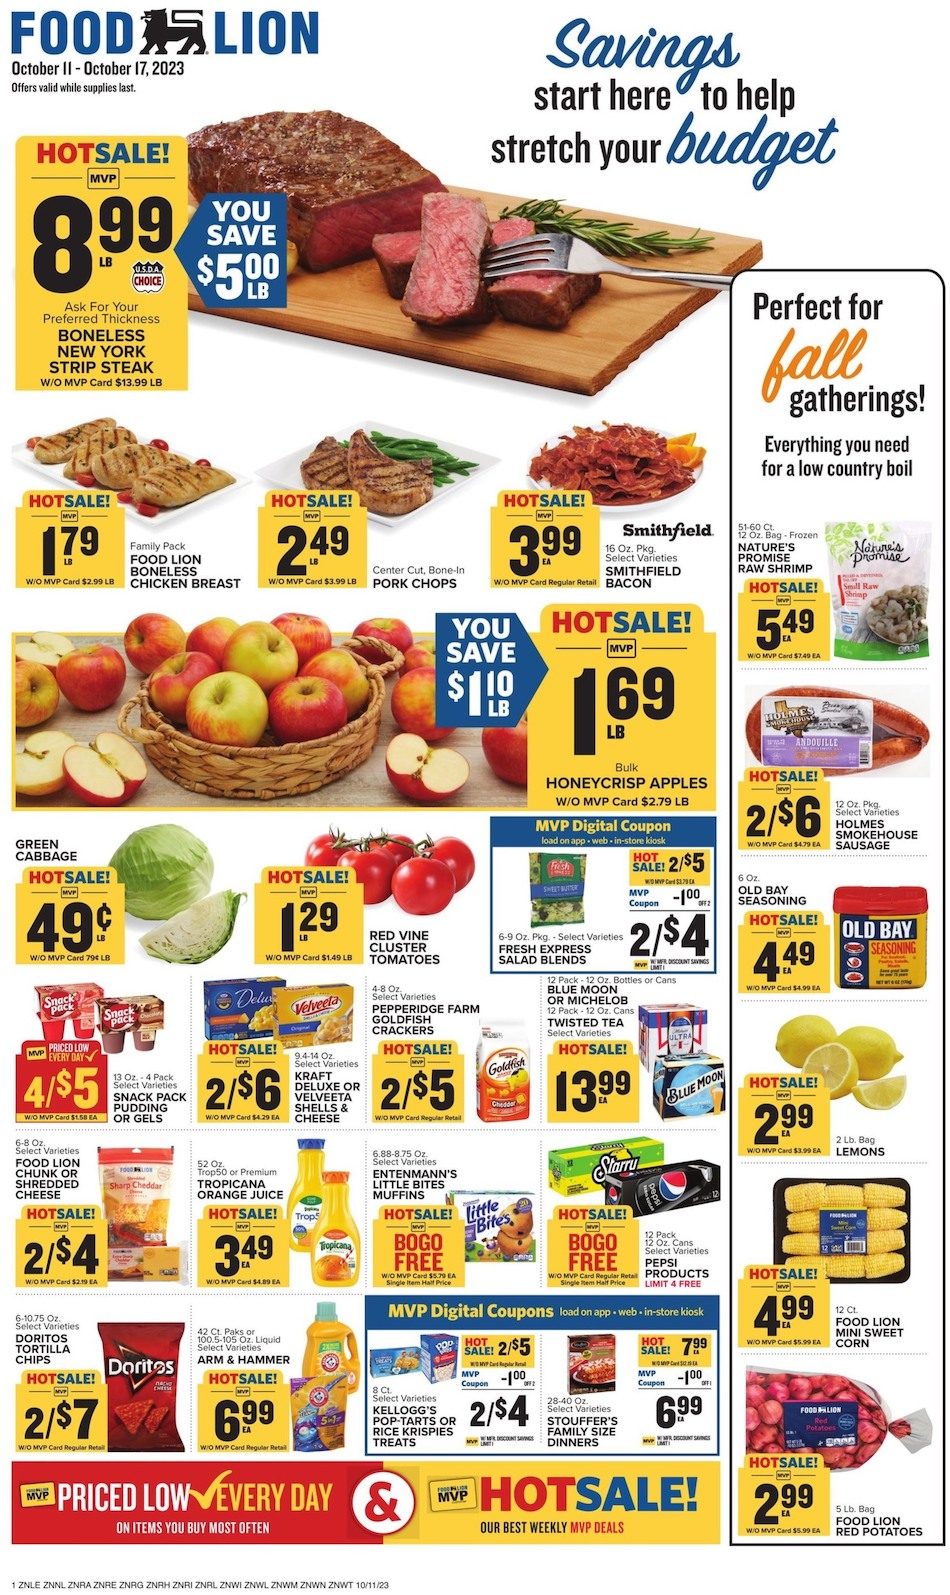 Food Lion Weekly Ad 11th – 17th October 2023 Page 1